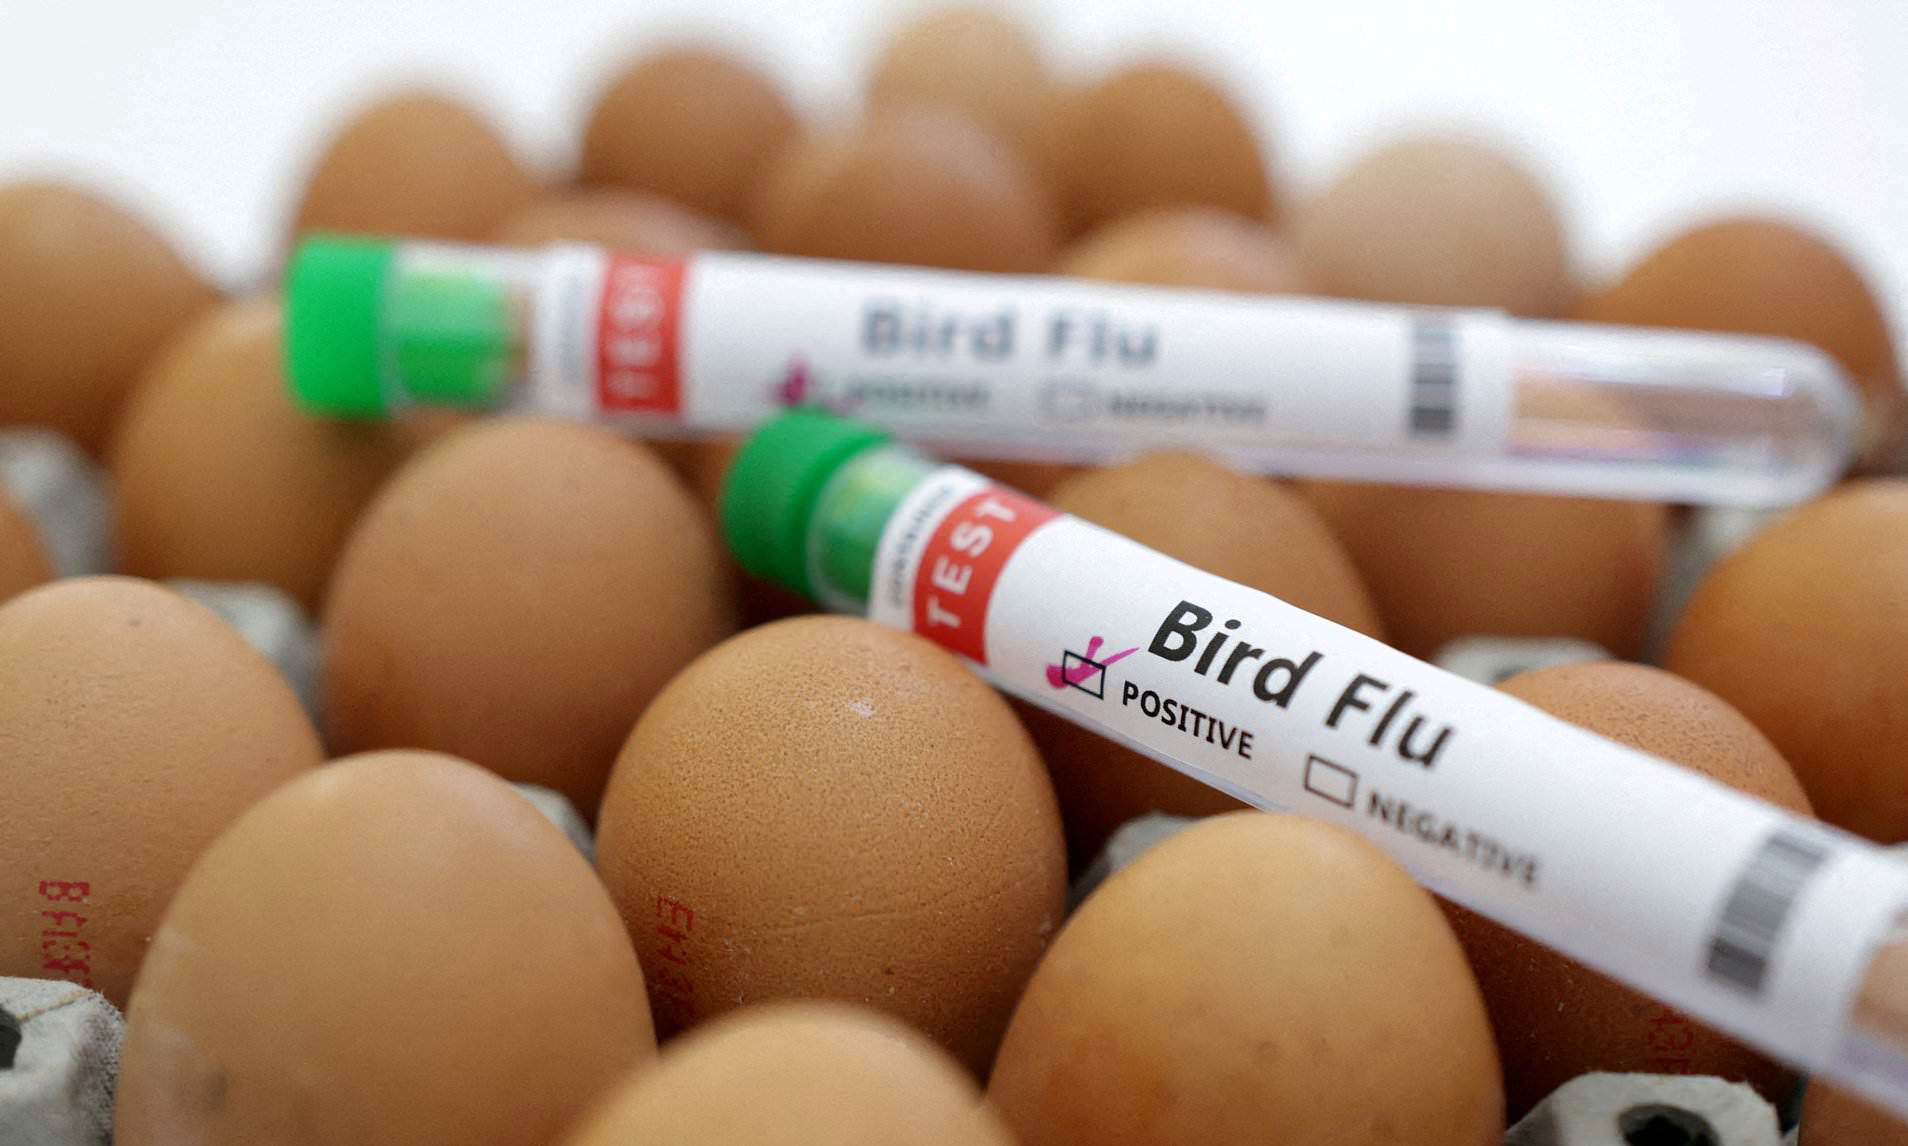 CDC issues fresh bird flu warning for doctors to look out for symptoms